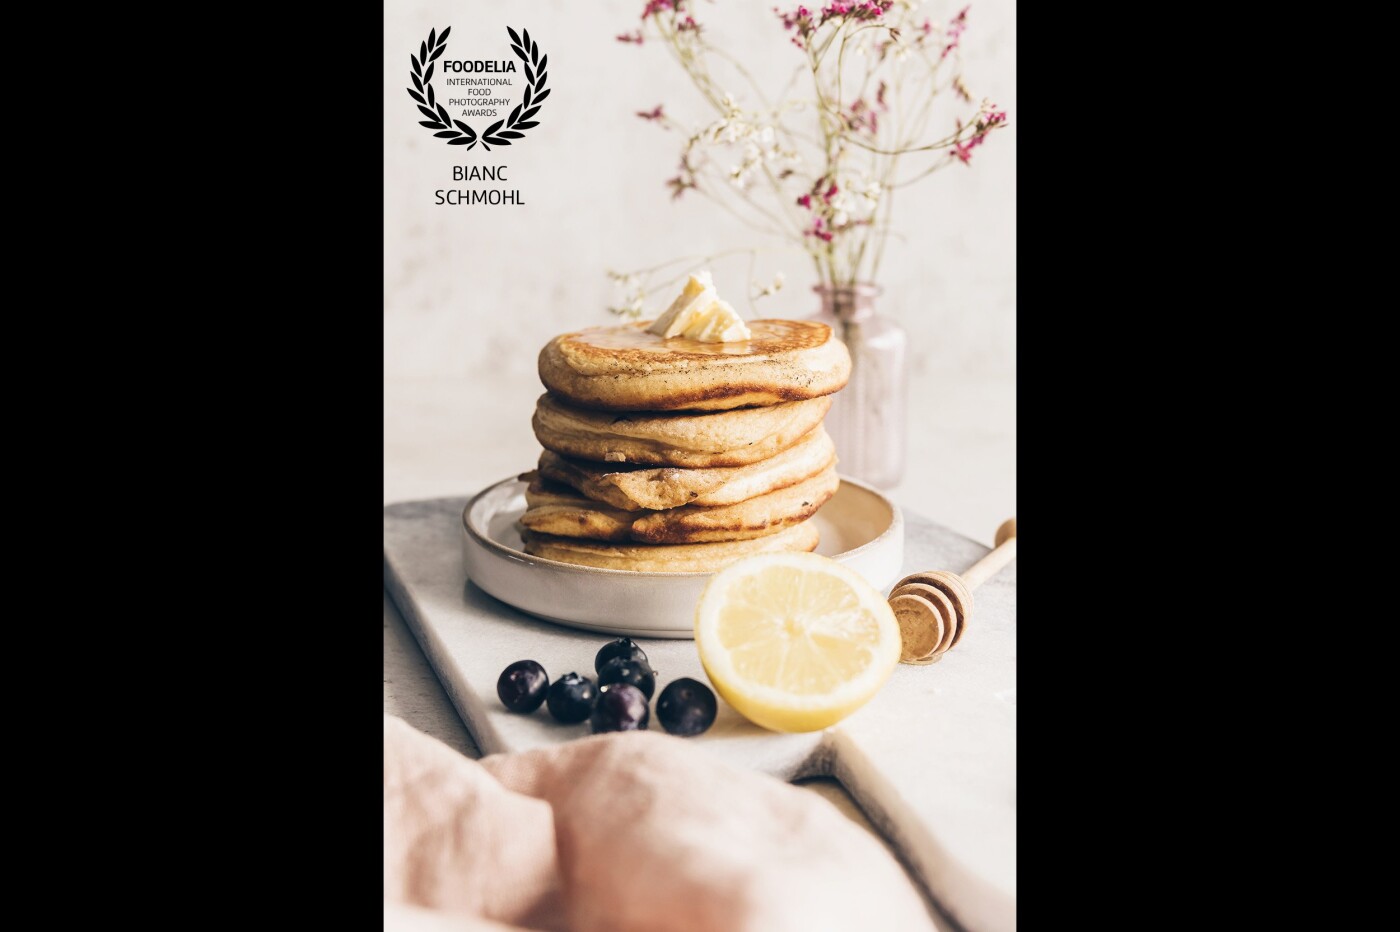 Fluffy pancakes, do we need to say more? Made a stack, just to add more depth in the photo, and made the pancake pile stand out between decoration/props like lemon, blueberries and honey stick.